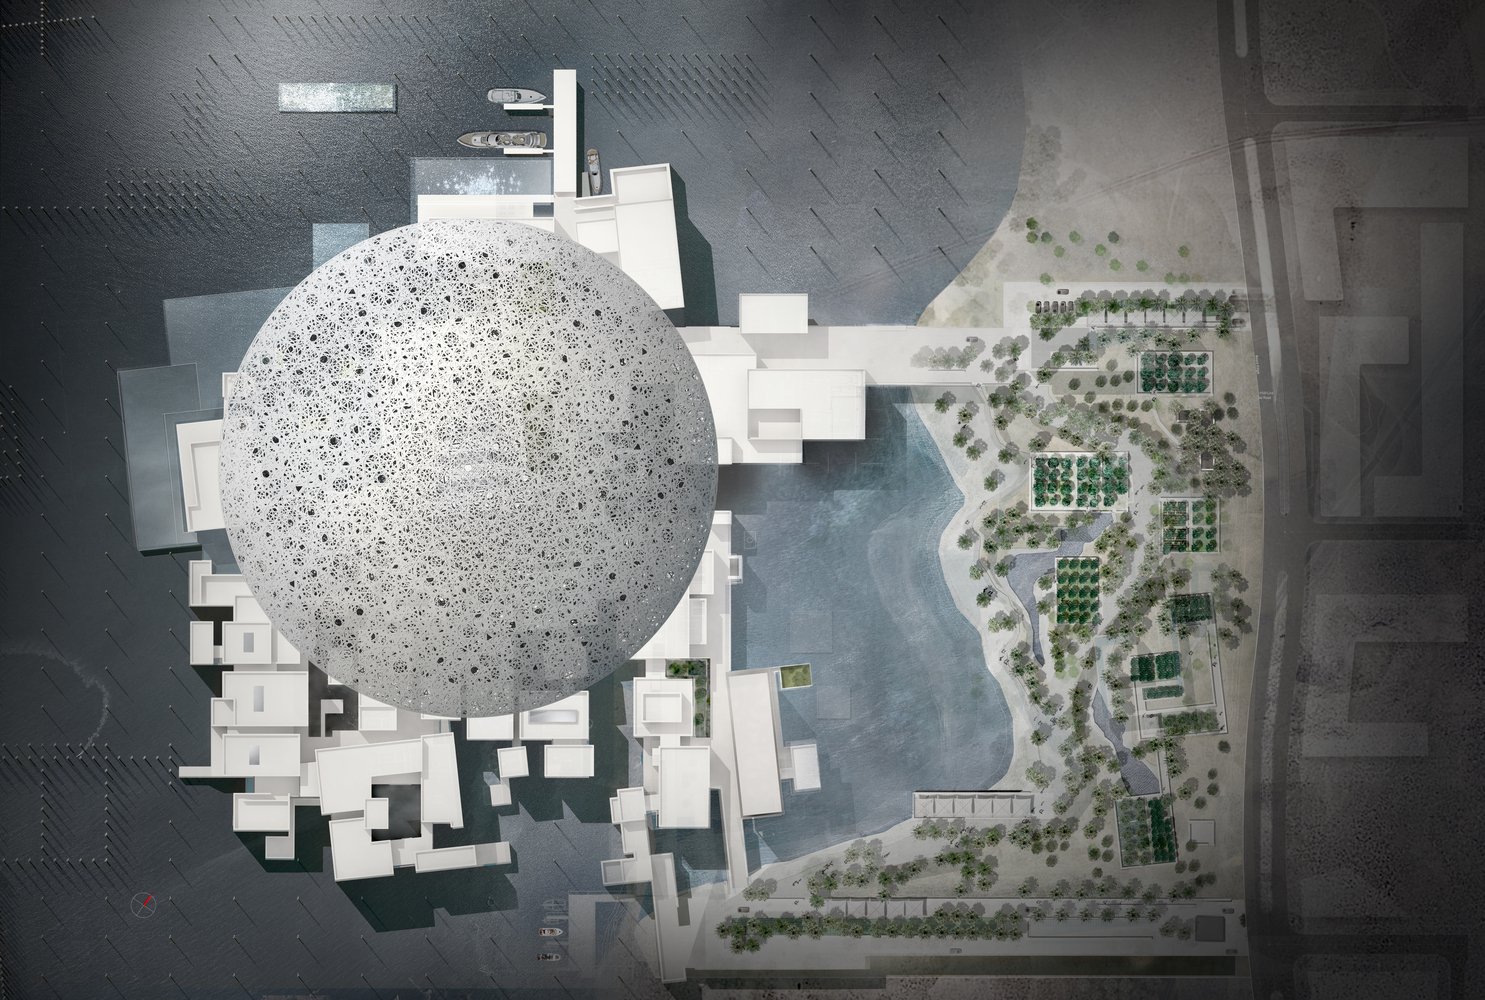 Rendered plan of the Louvre Abu Dhabi